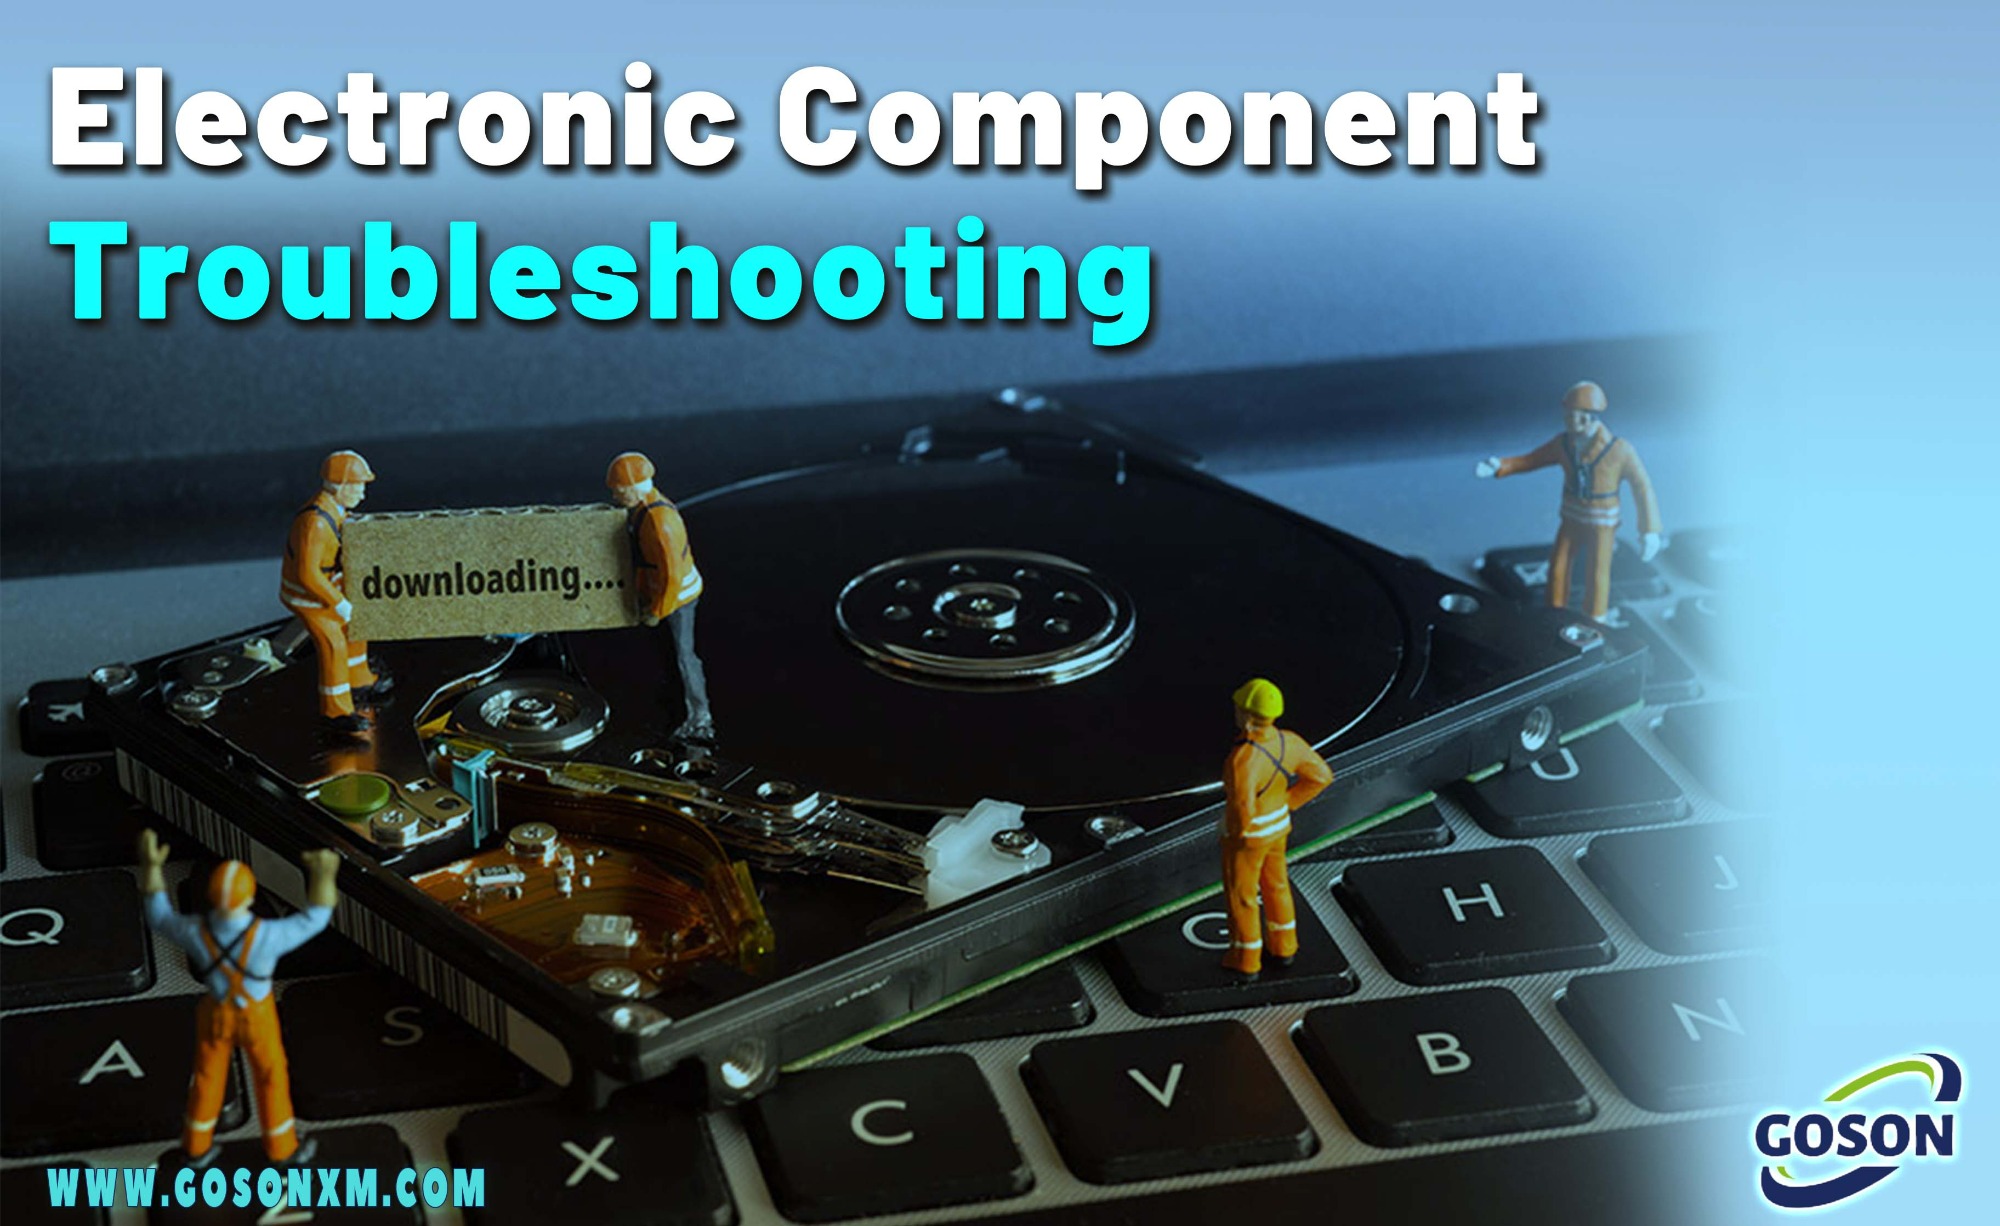 Repair！Start by learning to troubleshoot electronic components